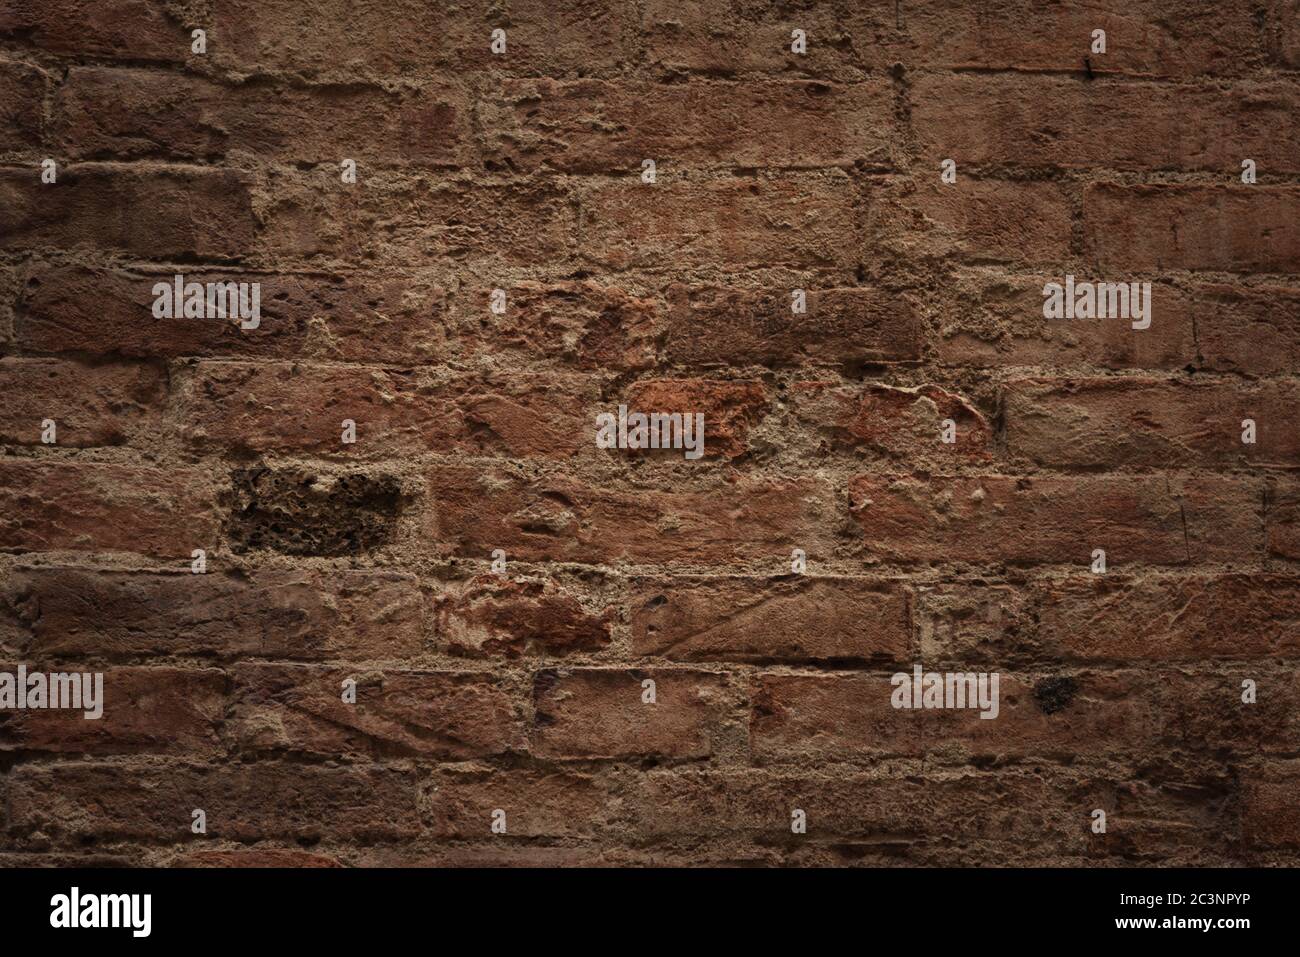 Old brick wall, old texture of red stone blocks close-up Stock Photo